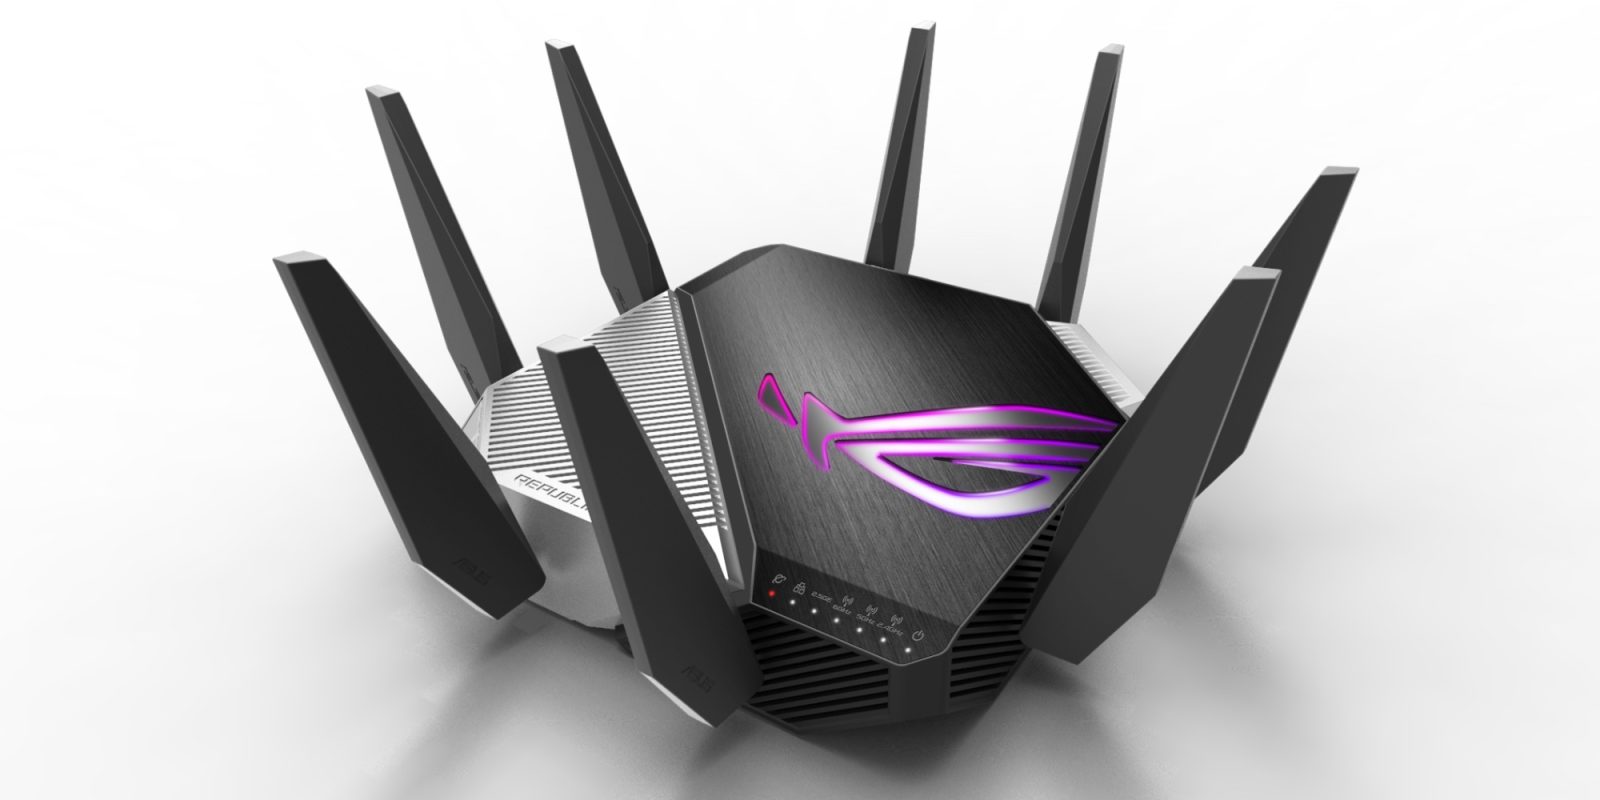 asus-brings-wi-fi-6e-to-the-market-for-the-first-time-with-upcoming